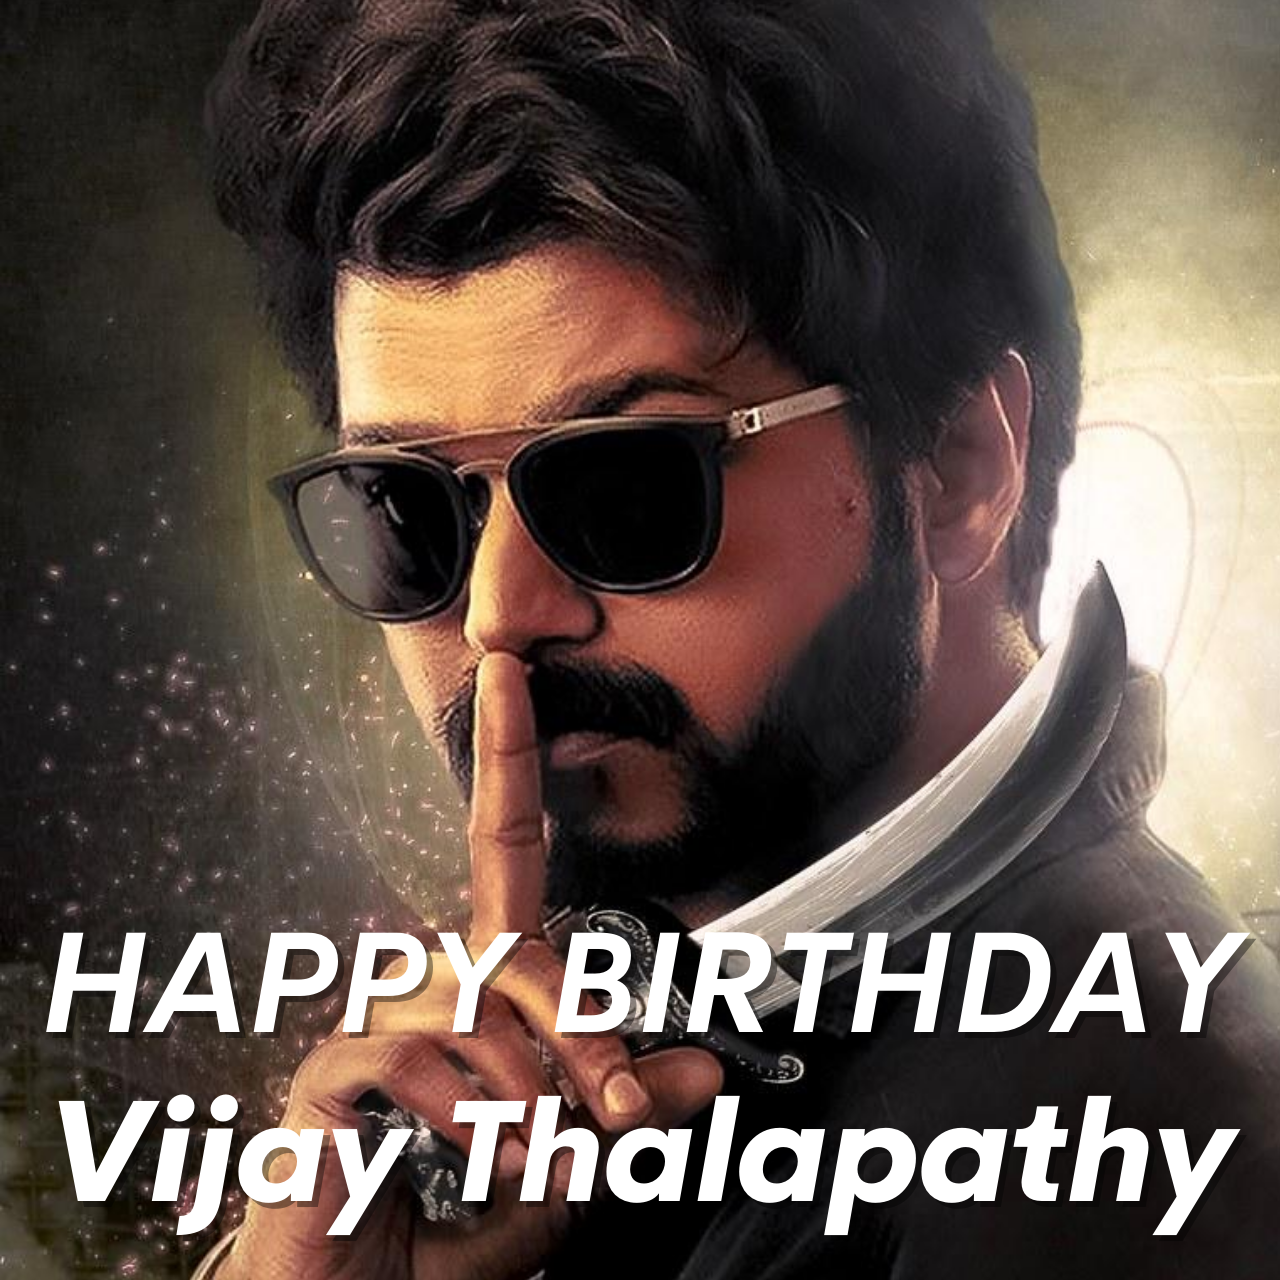 Happy Birthday Vijay Thalapthy: Photos (Images), Wishes, Quotes, Poster, Banner, and WhatsApp Status Video Download to greet Thalapathy